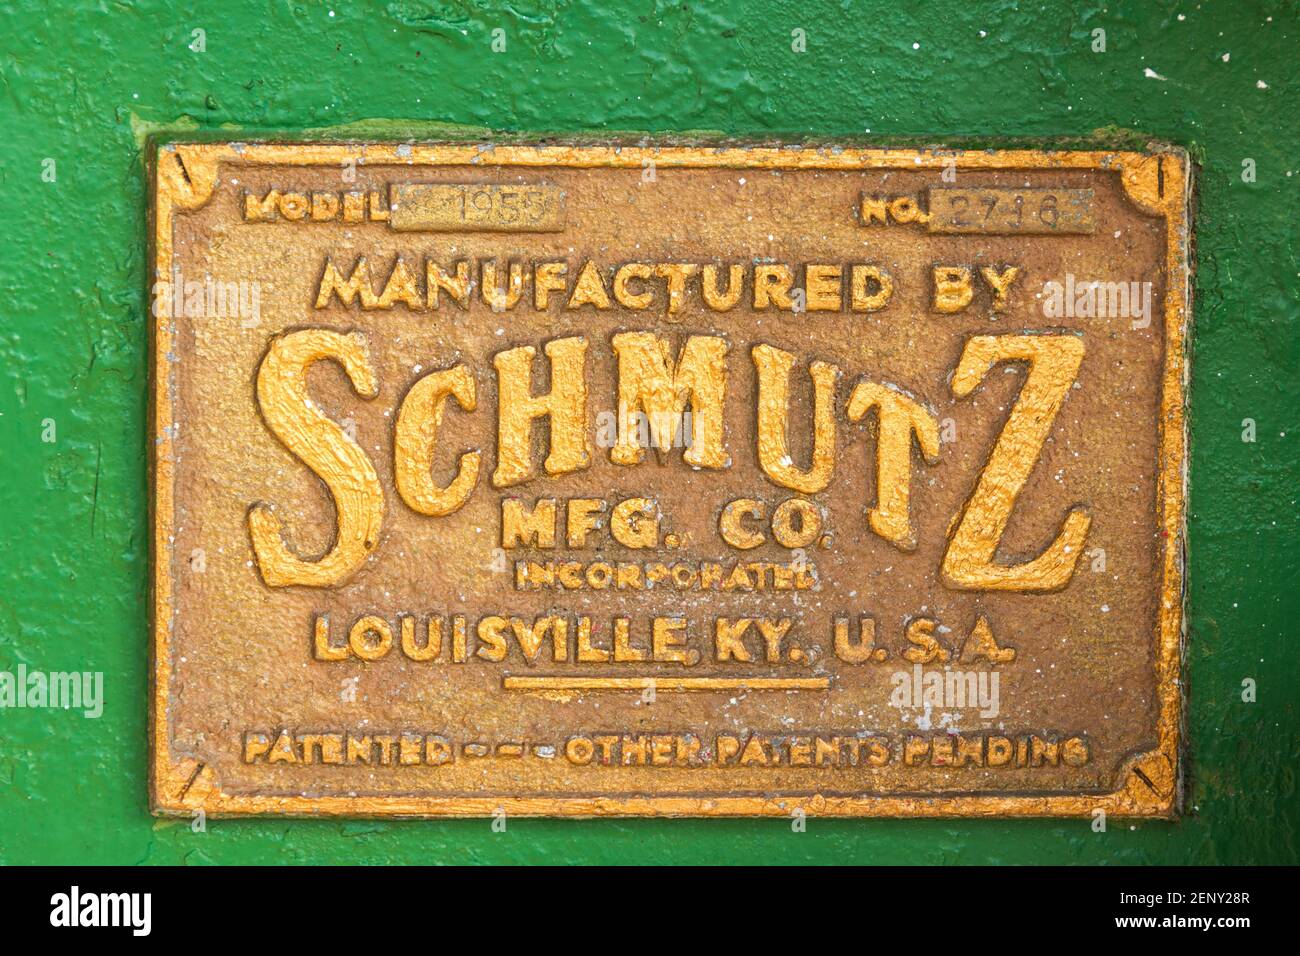 Seal of a Schmutz vintage machinery used in  a vintage Cuban sugar mill conserved as a tourist attraction, the place shows a historic timeline of the Stock Photo